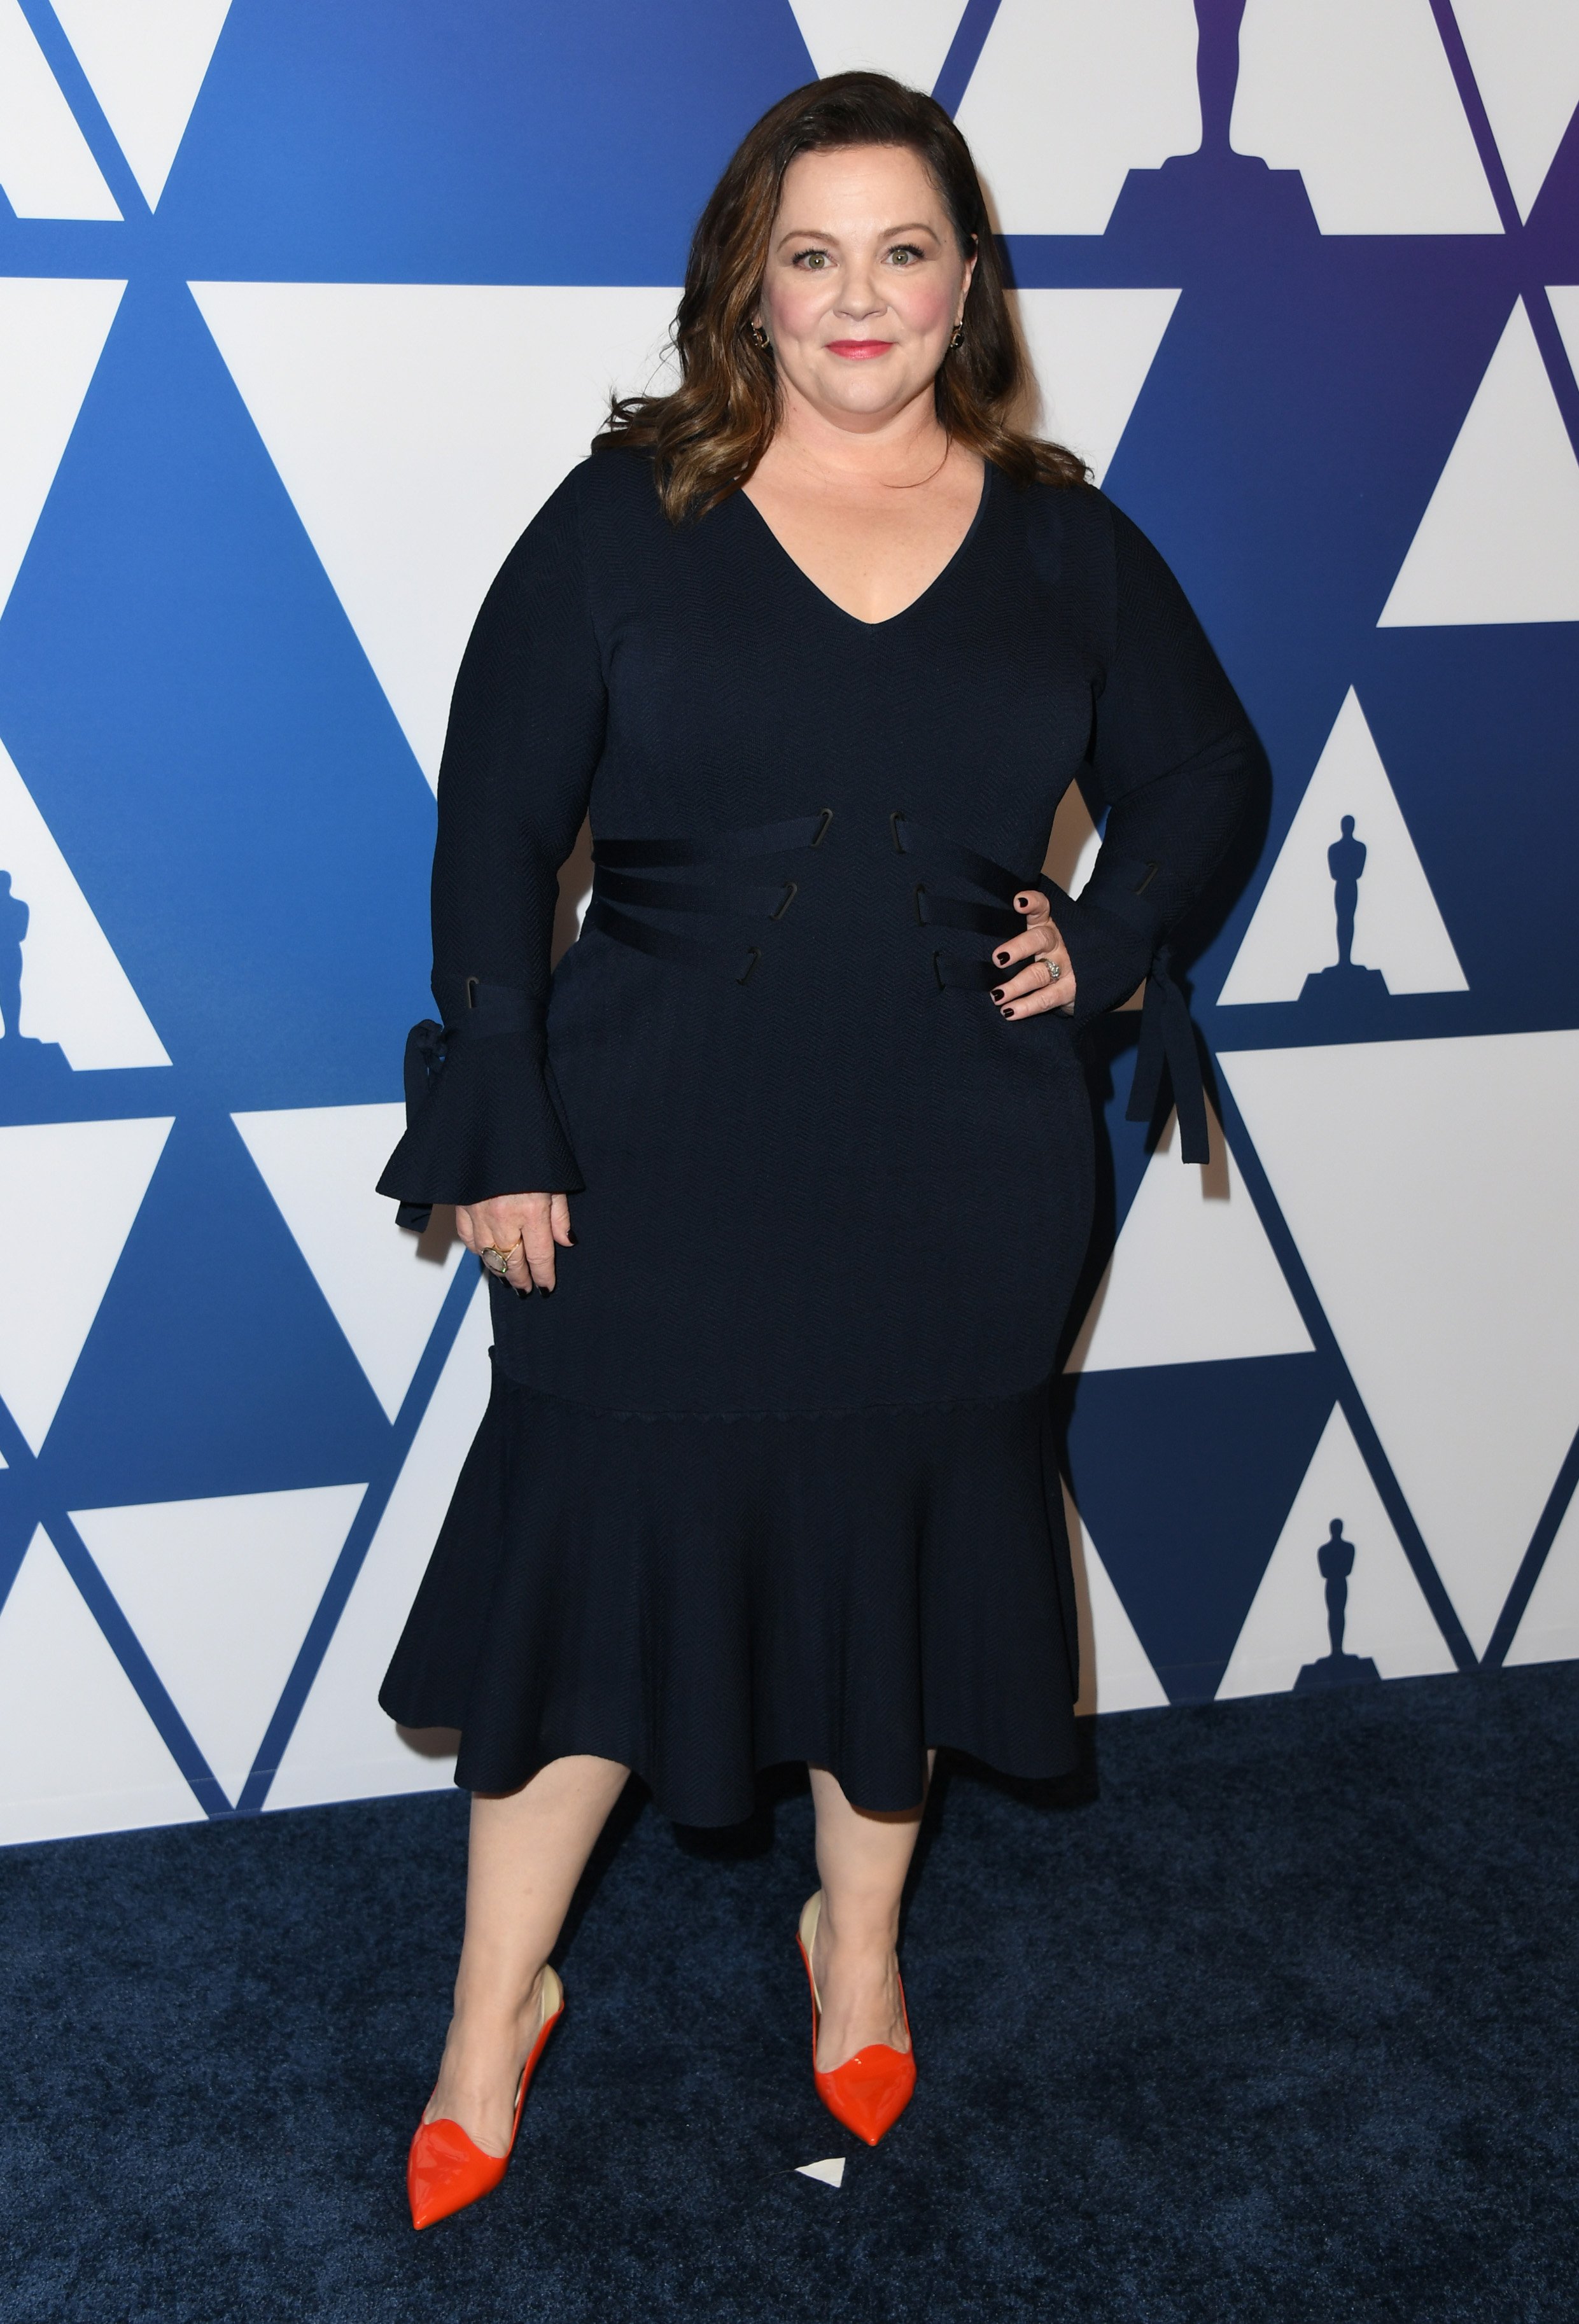 Melissa McCarthy at the BAFTA 2019 Awards | Photo: Getty Images